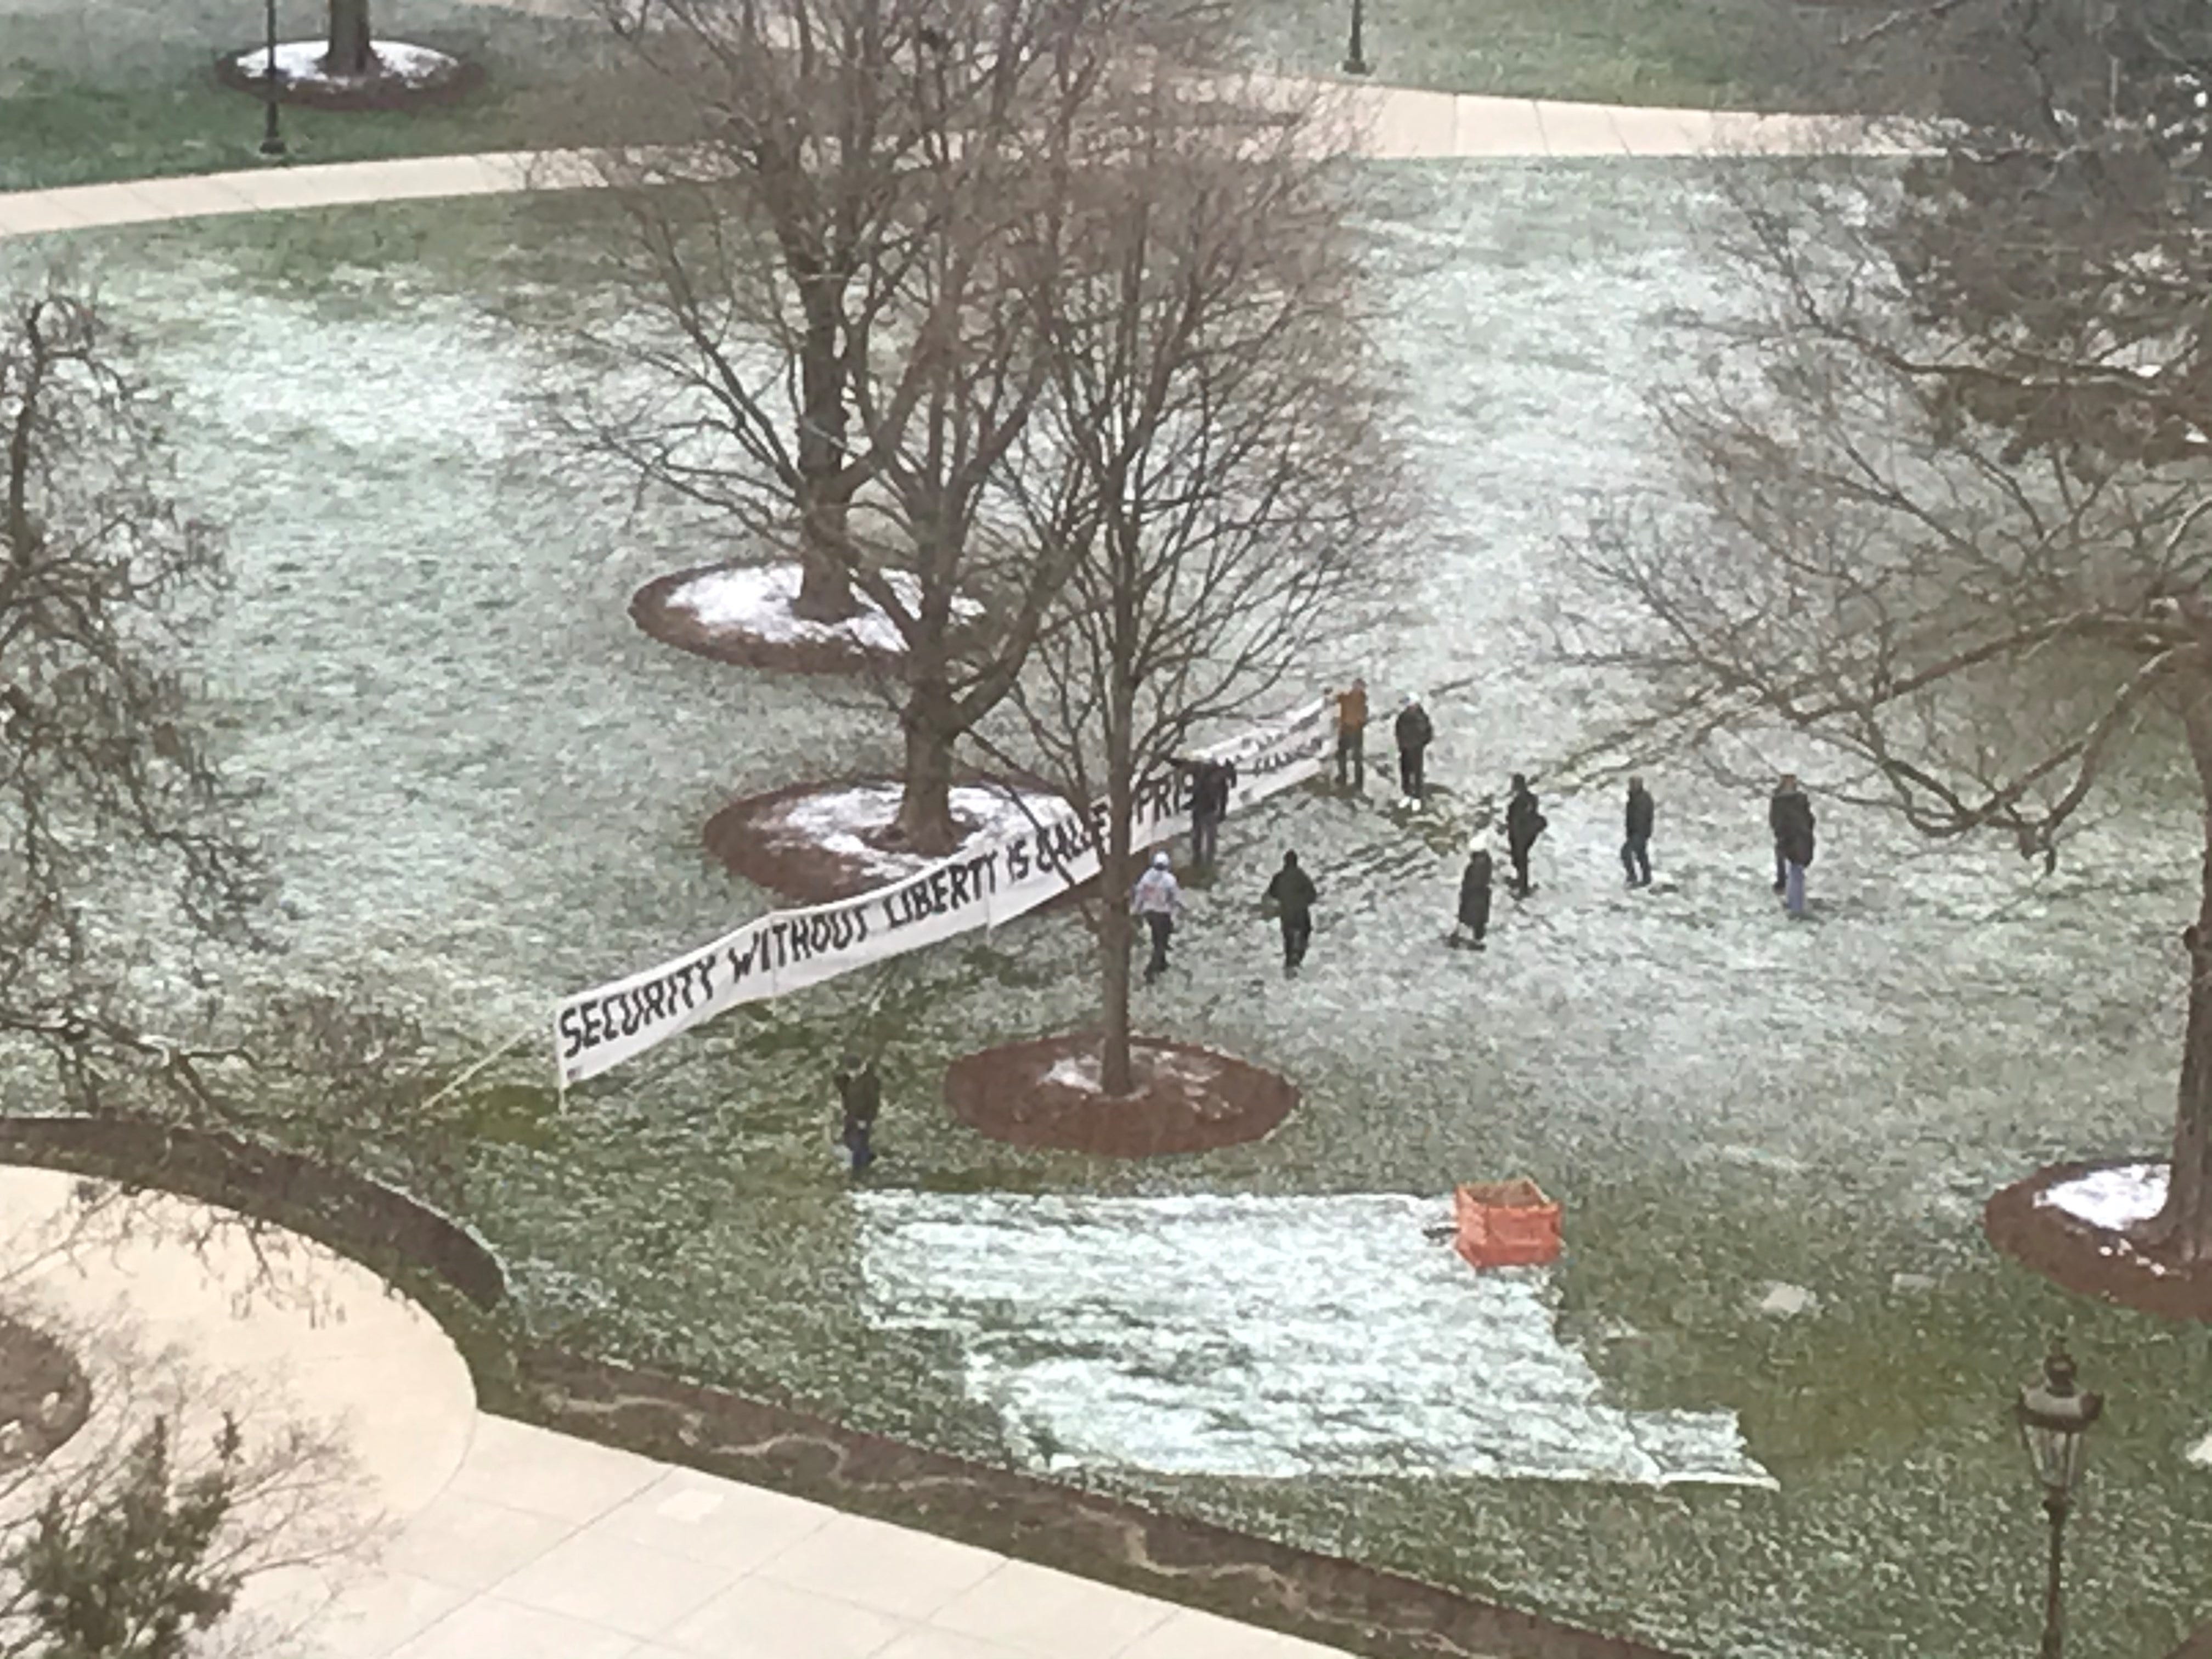 Protesters participating in the Operation Gridlock rally around the Michigan Capitol set up a sign saying "Security Without Liberty Is Called Prison" on Wednesday, April 15, 2020.